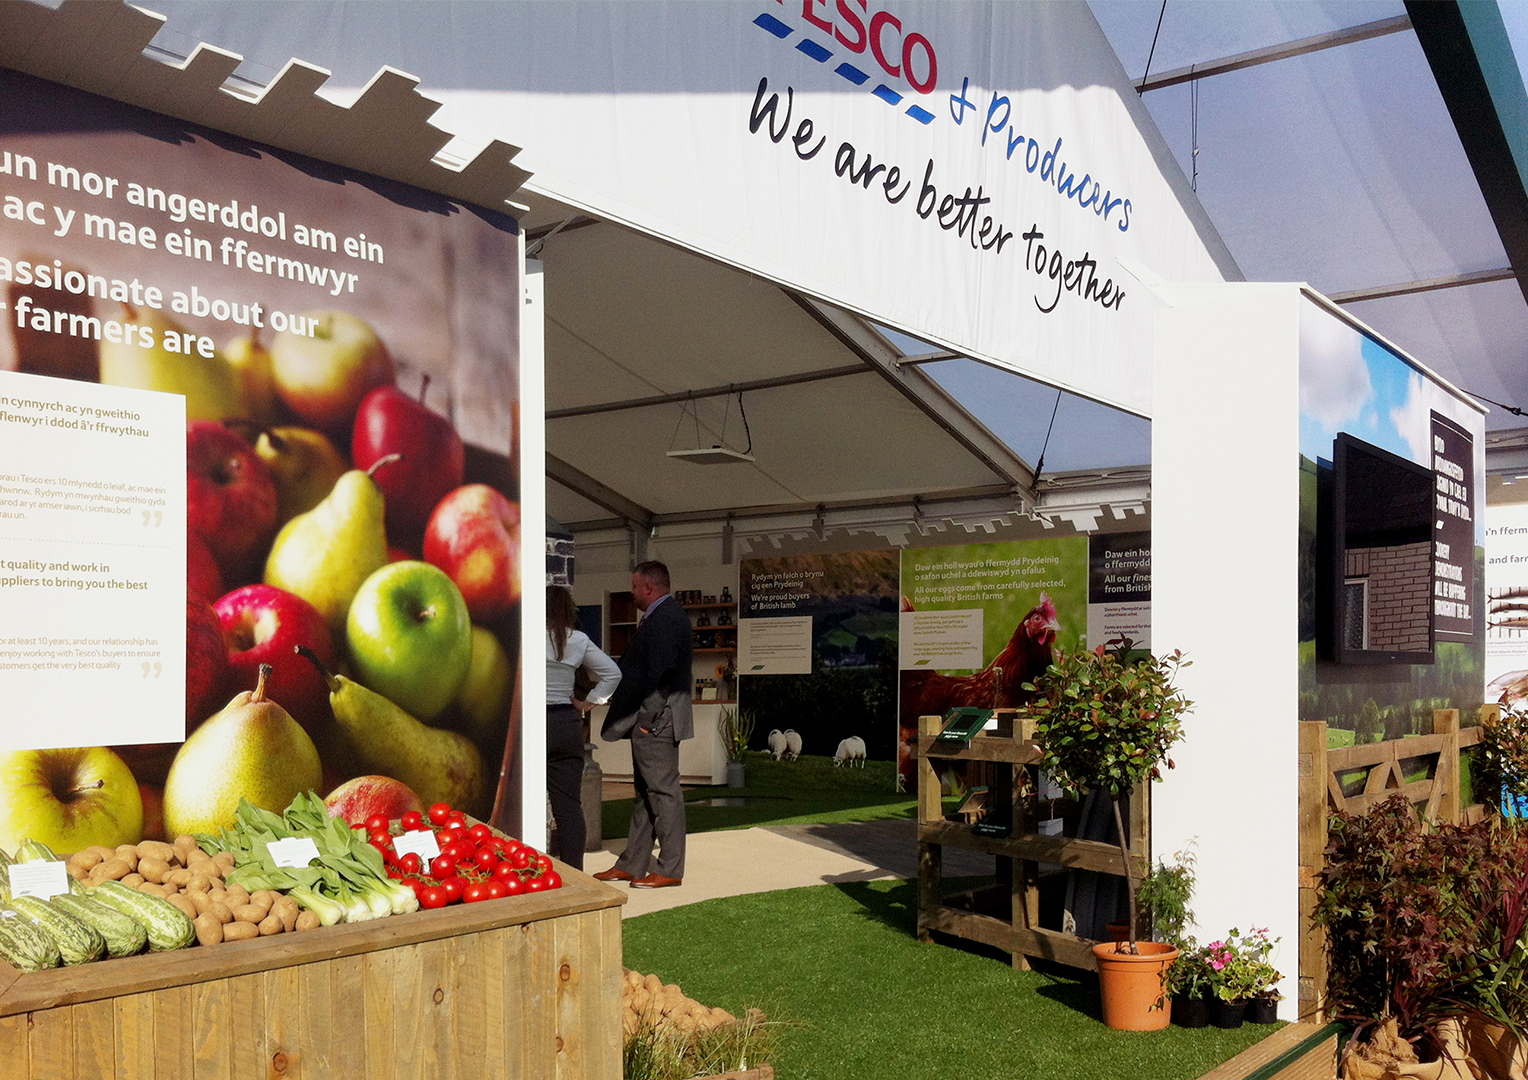 Tesco. Agricultural Show. Event space large format branding. Creative artwork and graphic design.